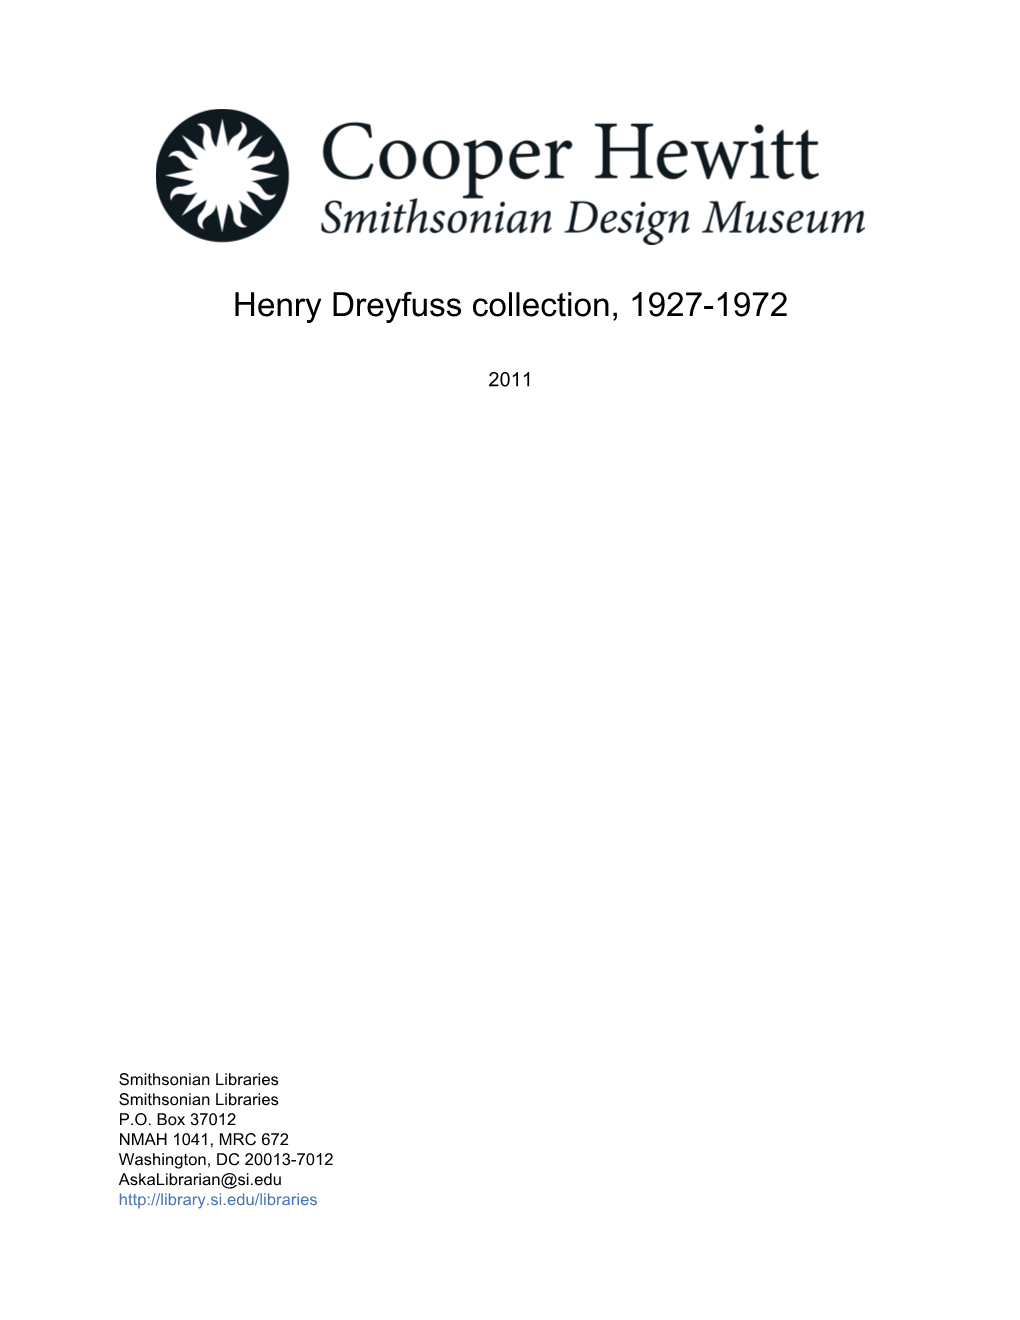 Henry Dreyfuss Collection, 1927-1972